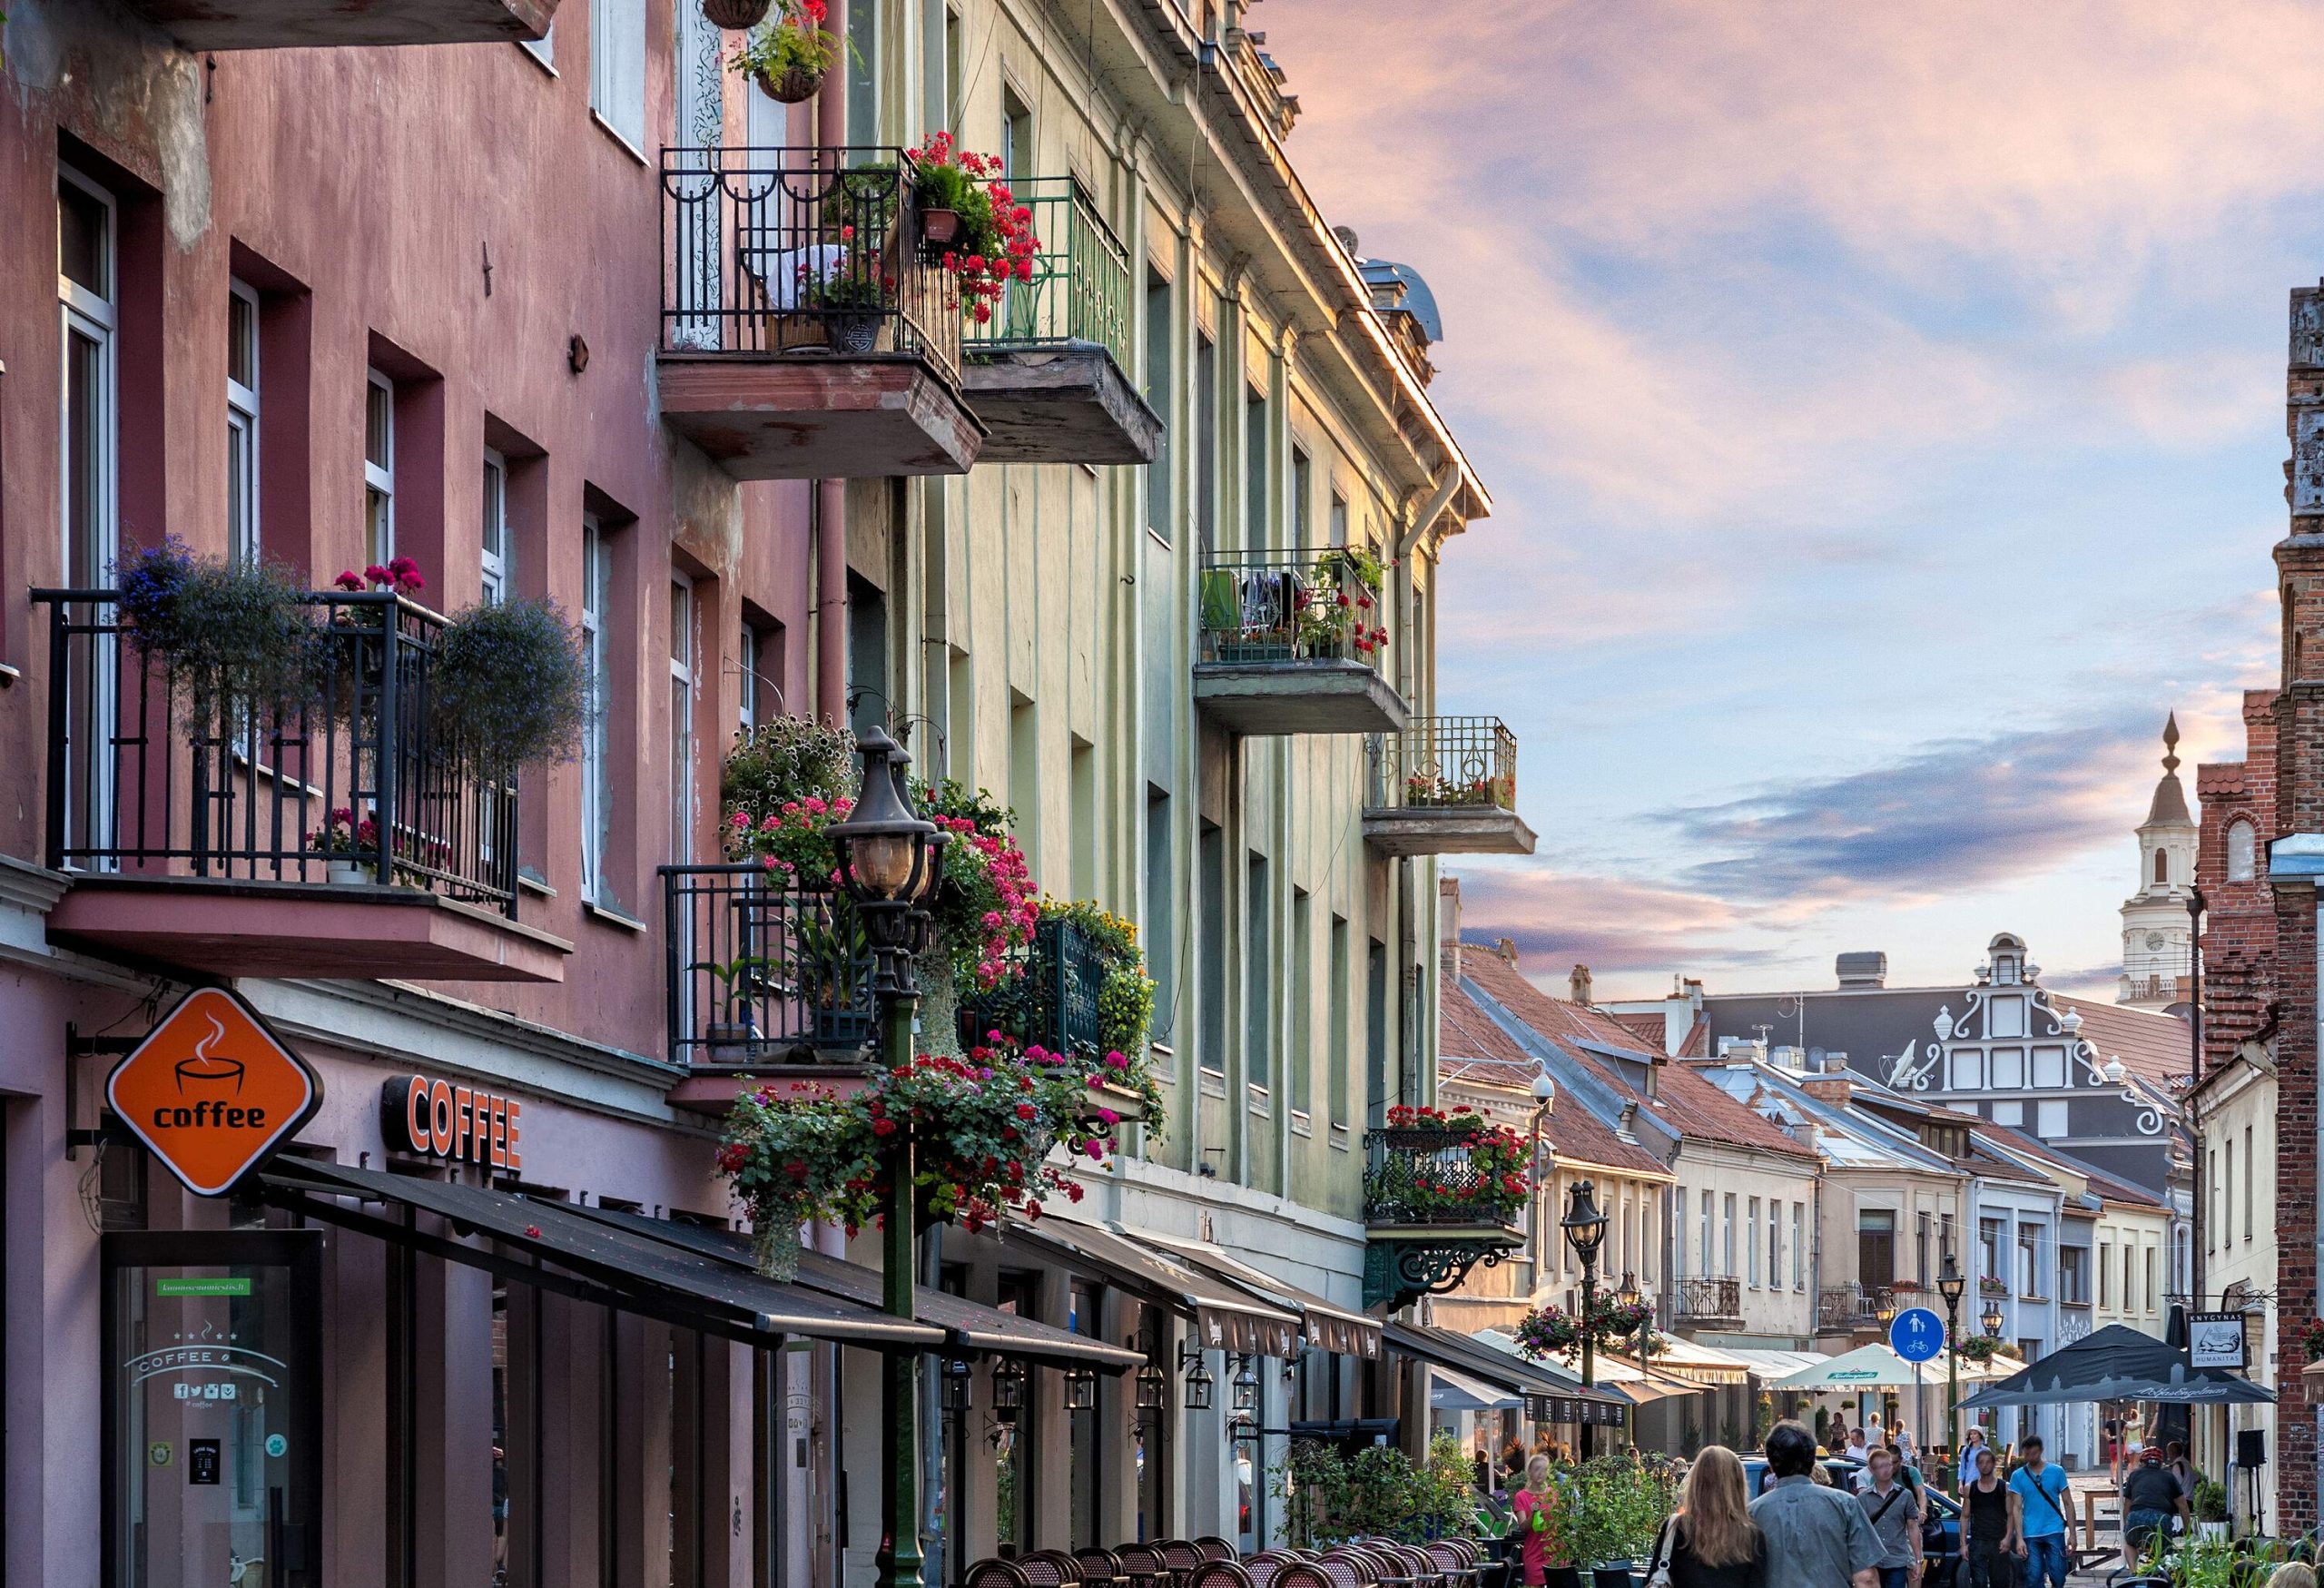 People leisurely wander along a picturesque cobblestone street, framed by buildings boasting charming balconies.